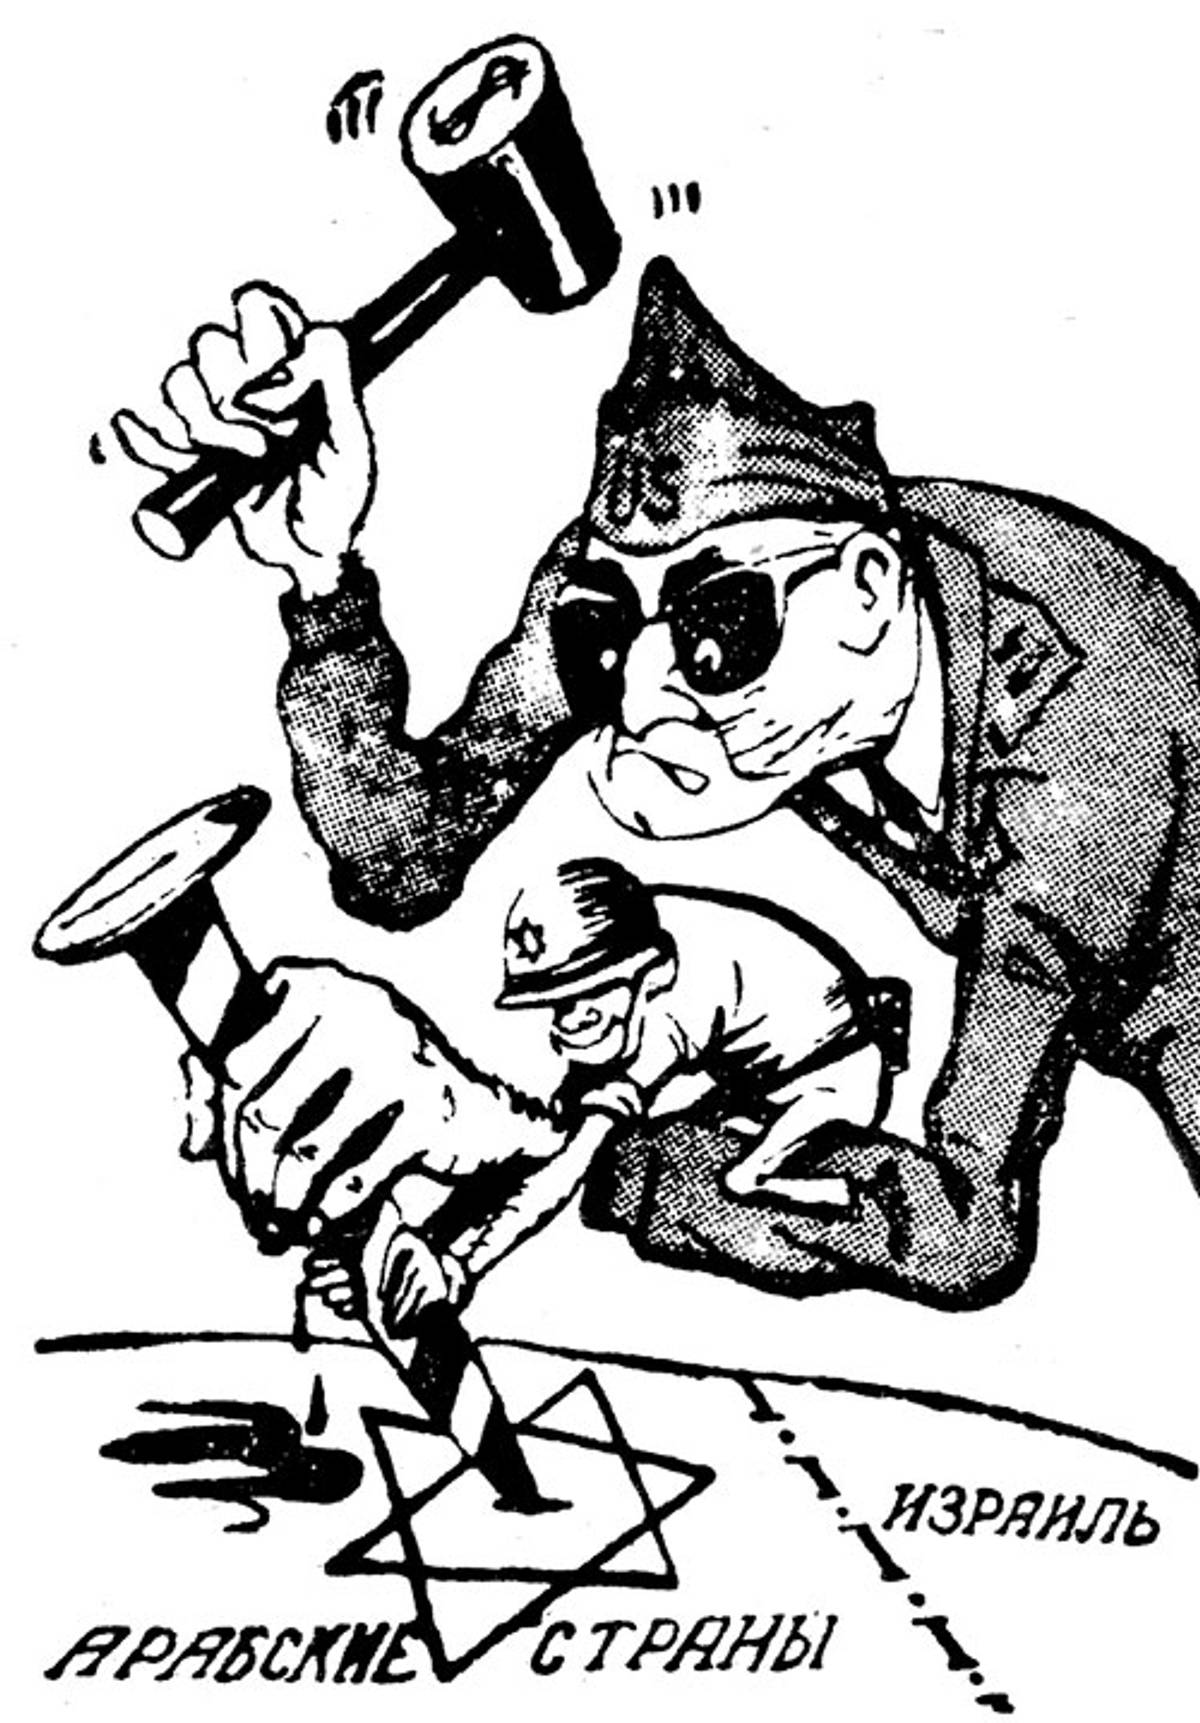 Fig. 4: ‘Plunderer’s designs,’ R. Gadimov, Bakinsky Rabochi, June 21, 1967. (From The Israeli-Arab Conflict in Soviet Caricatures, 1967–1973 by Yeshayahu Nir, Tcherikover Publishers, 1976)